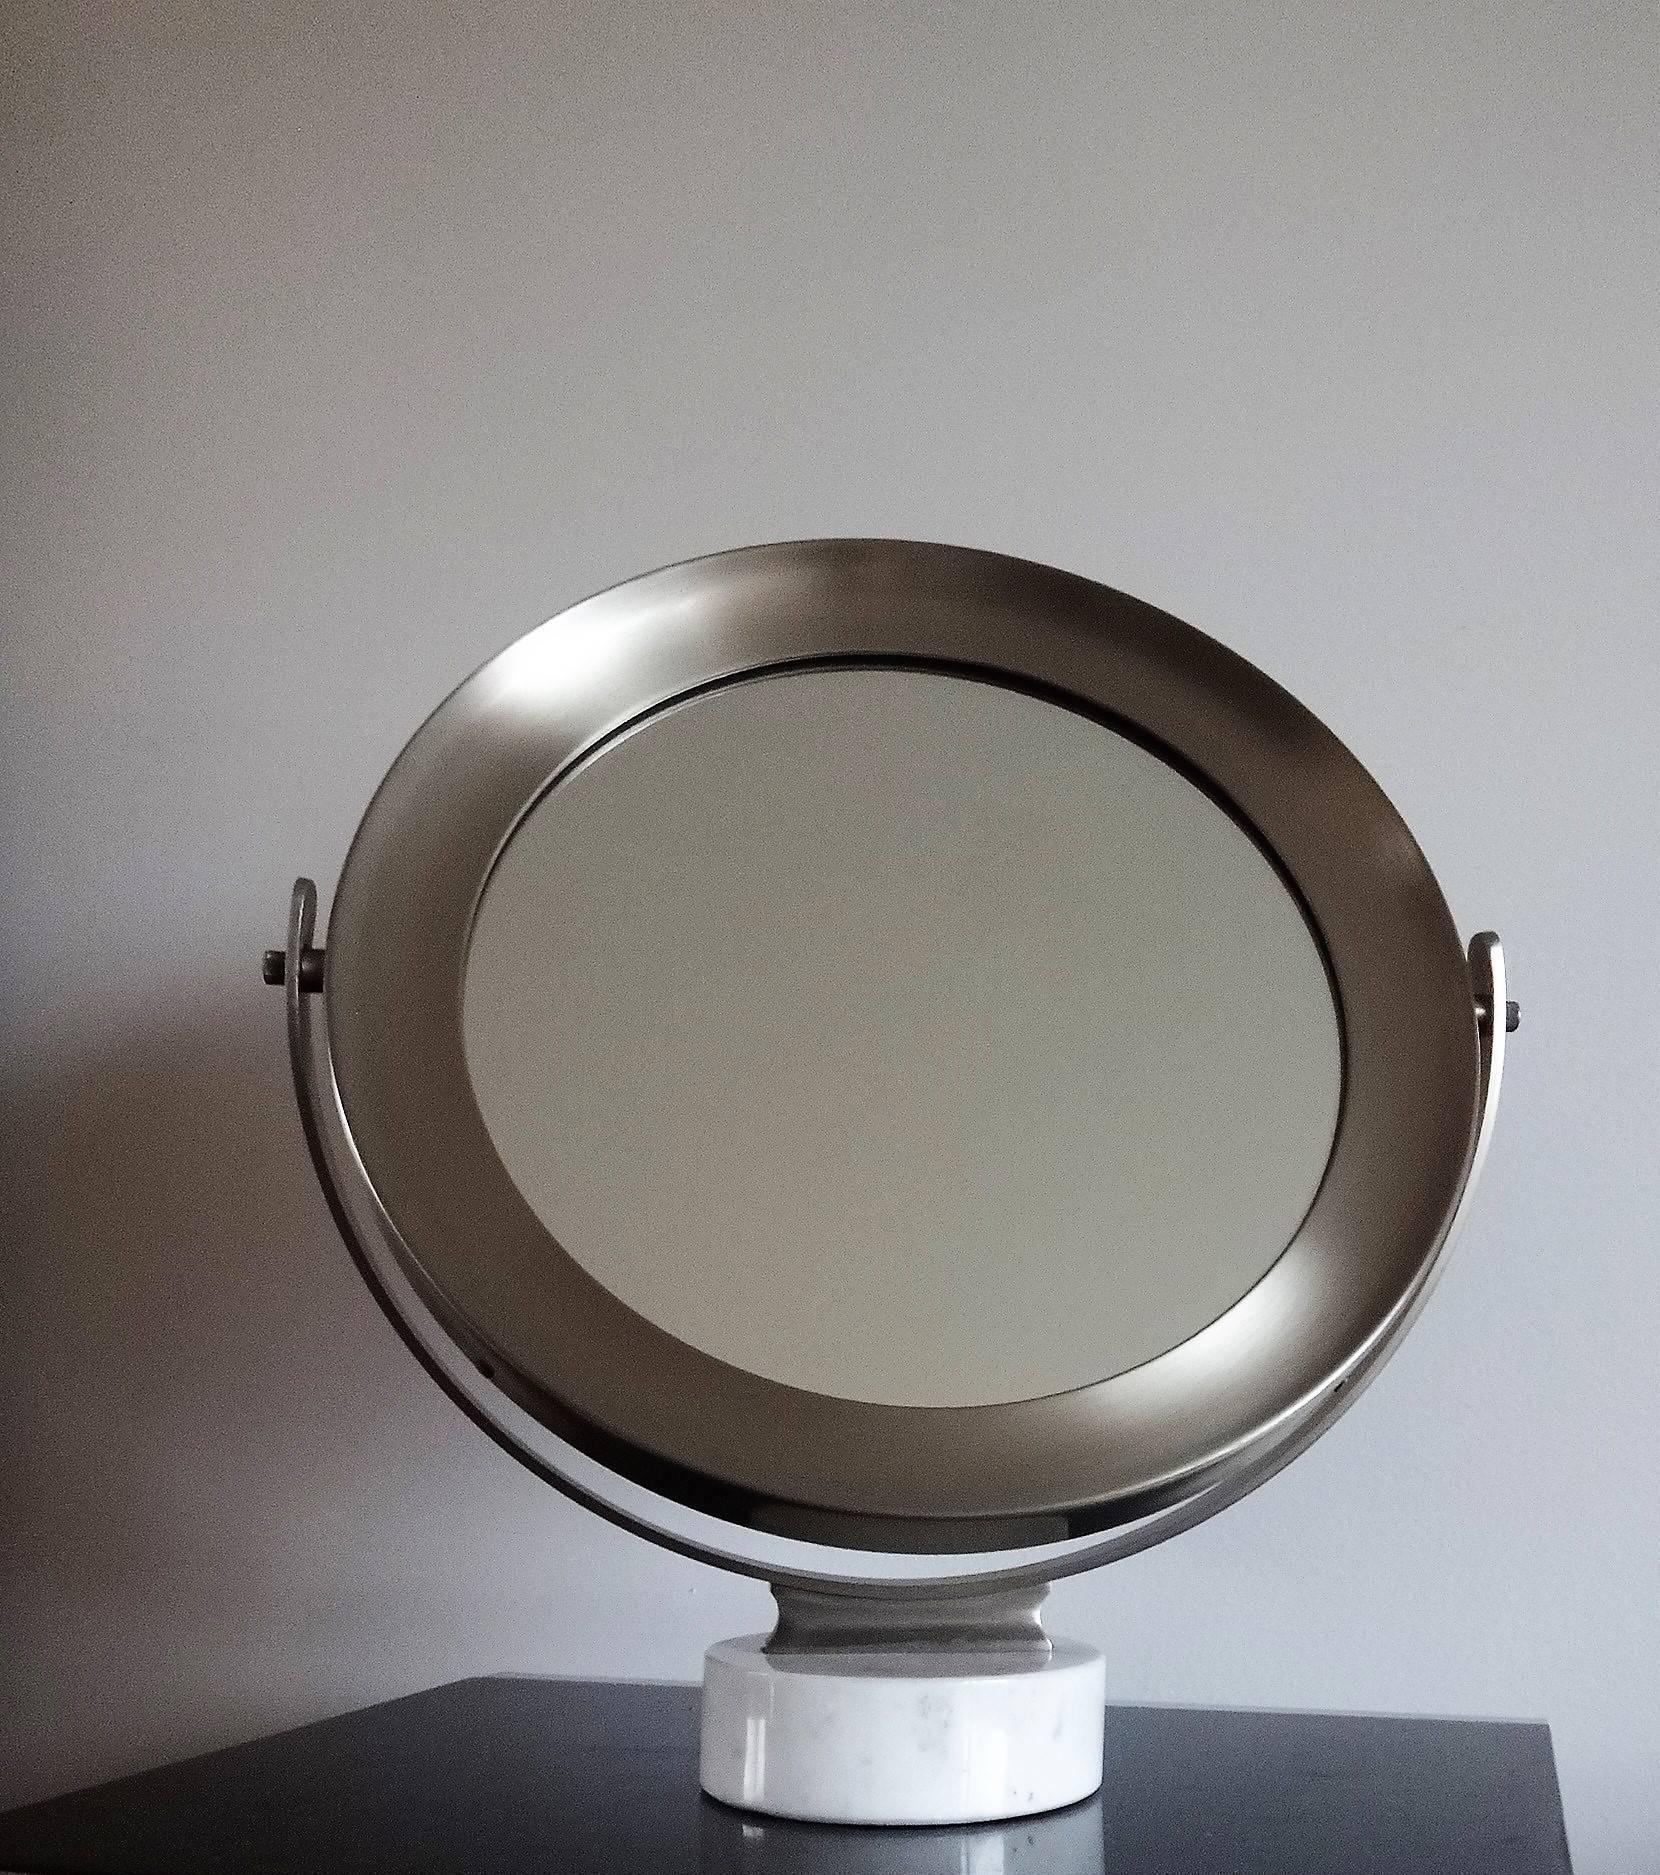 Sergio Mazza for Artemide
White carrara marble
Light patinated metal frame
good vintage condition
this item will ship from Paris, France
Price does not include shipping and possible customs related charges.